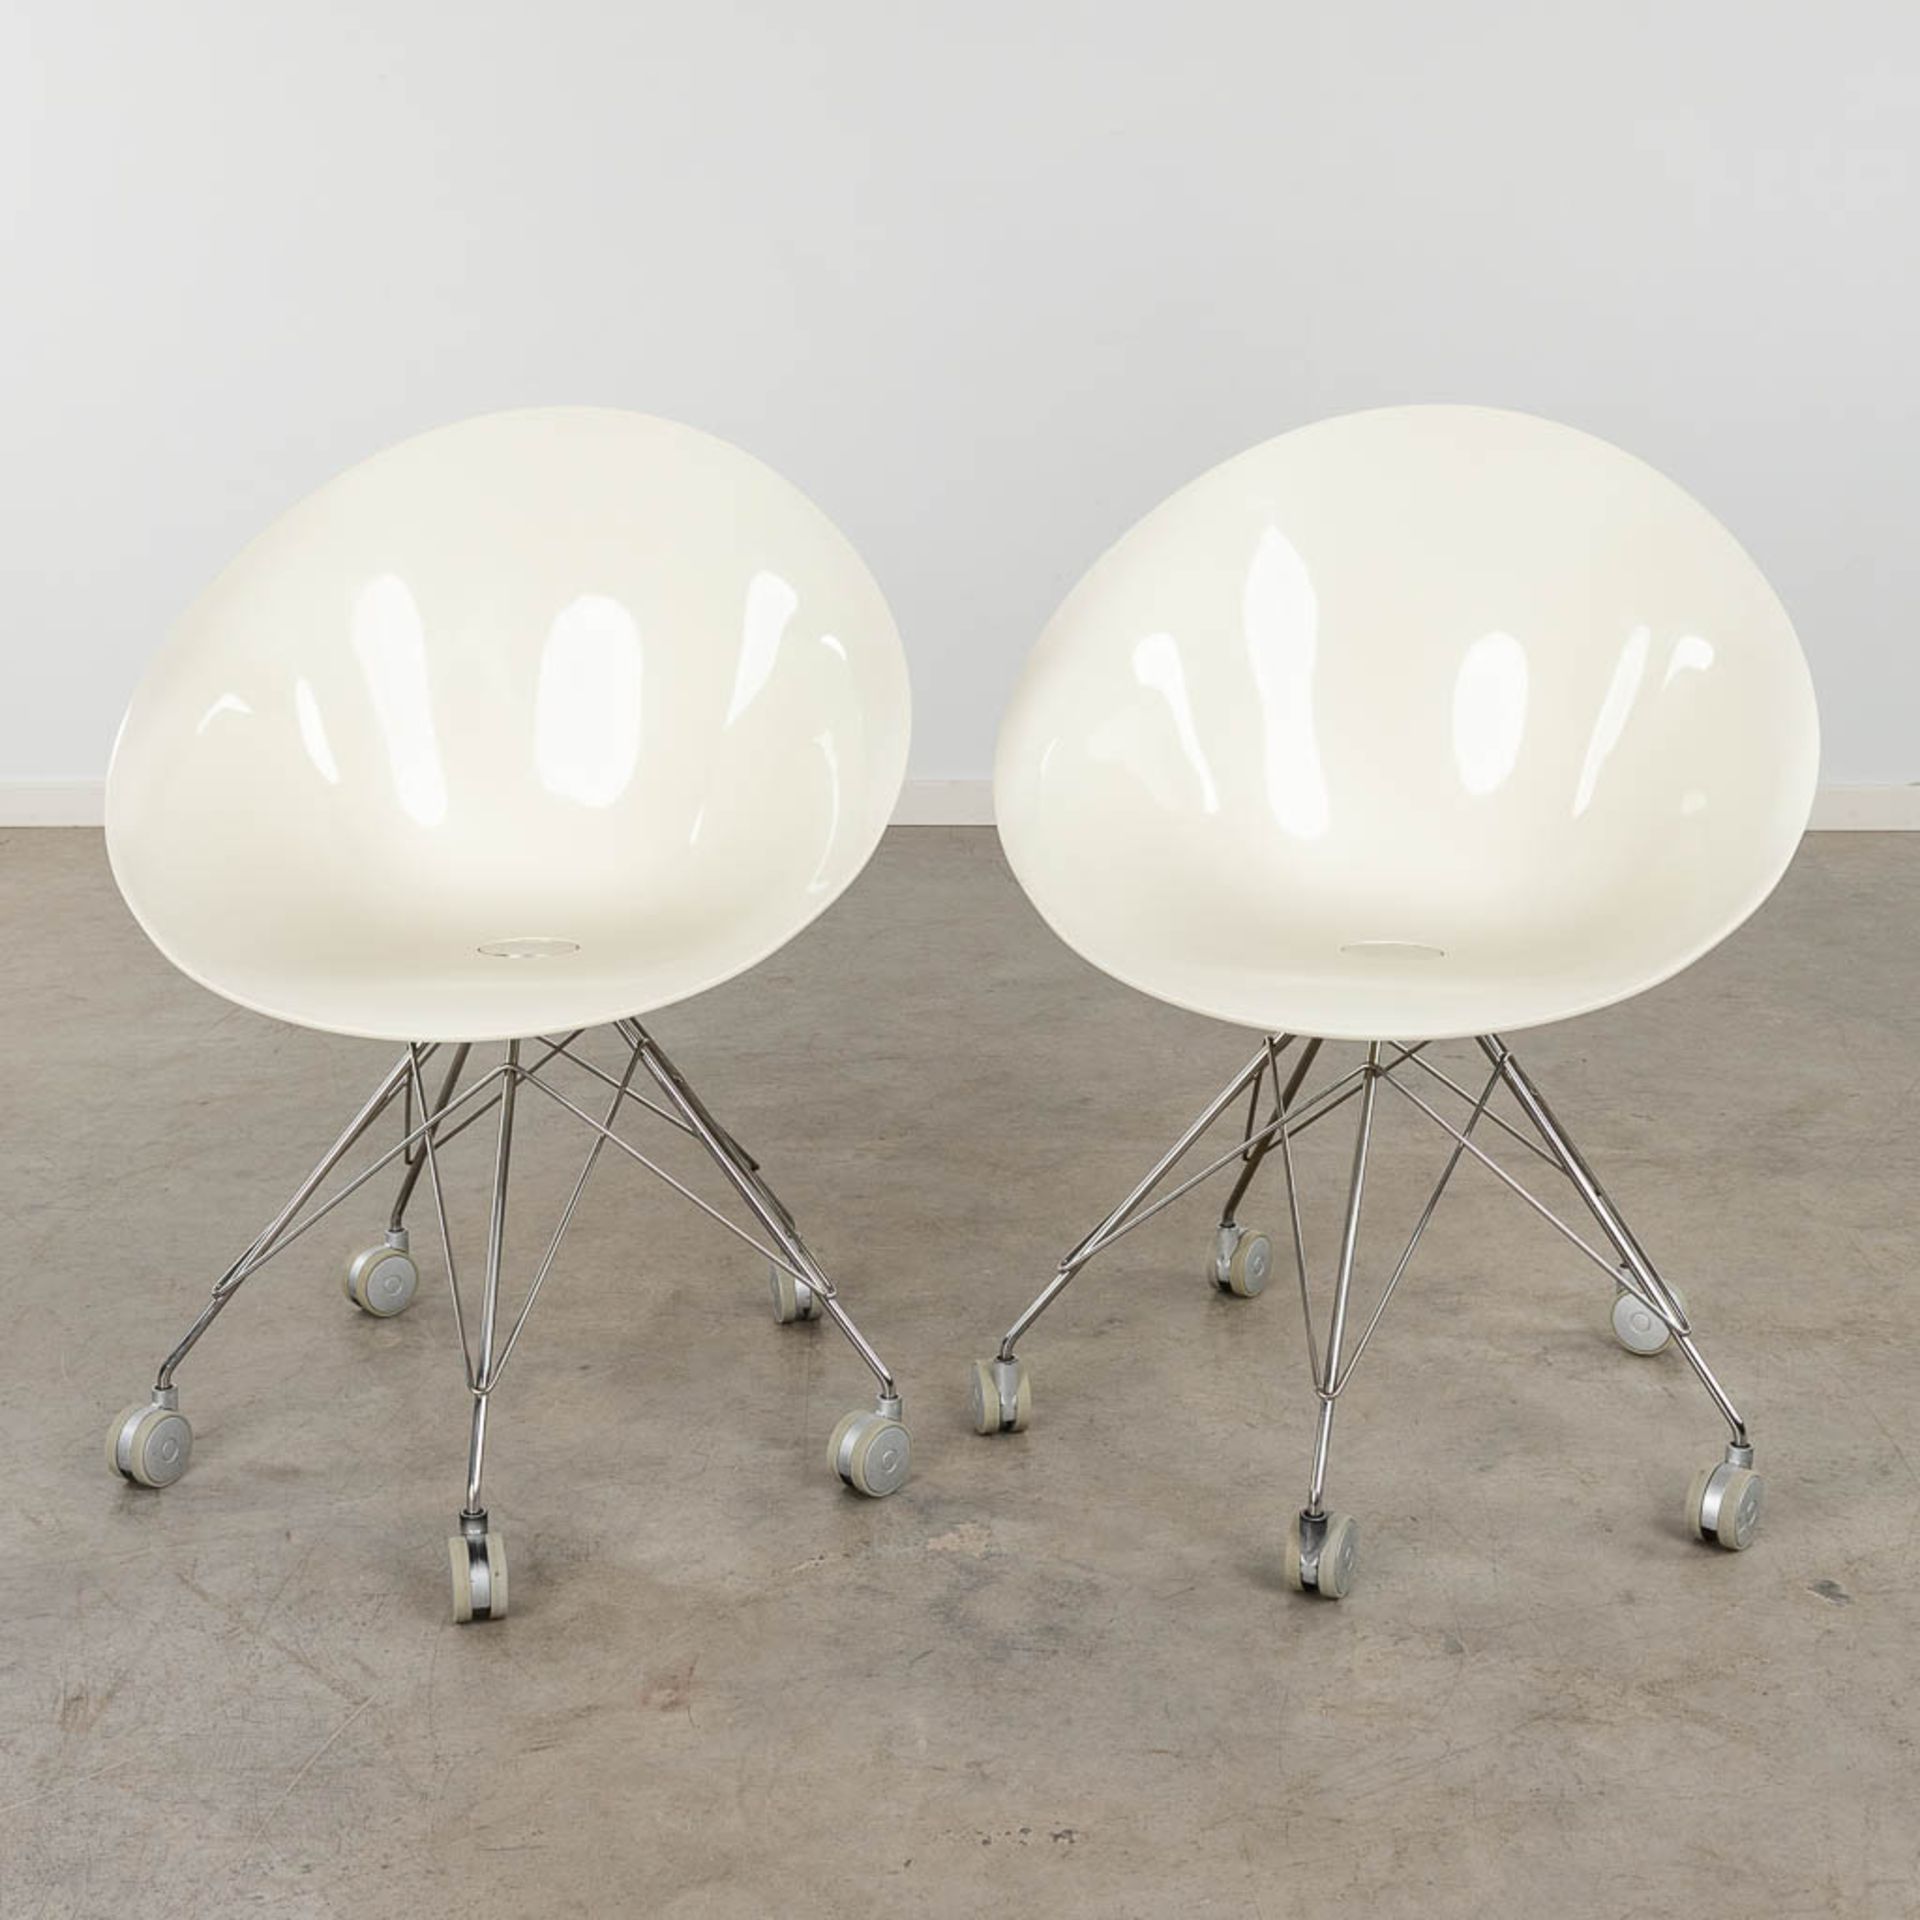 Philippe STARCK (1949) 'Ero' for Kartell, two office chairs. (D:59 x W:62 x H:82 cm) - Image 3 of 14